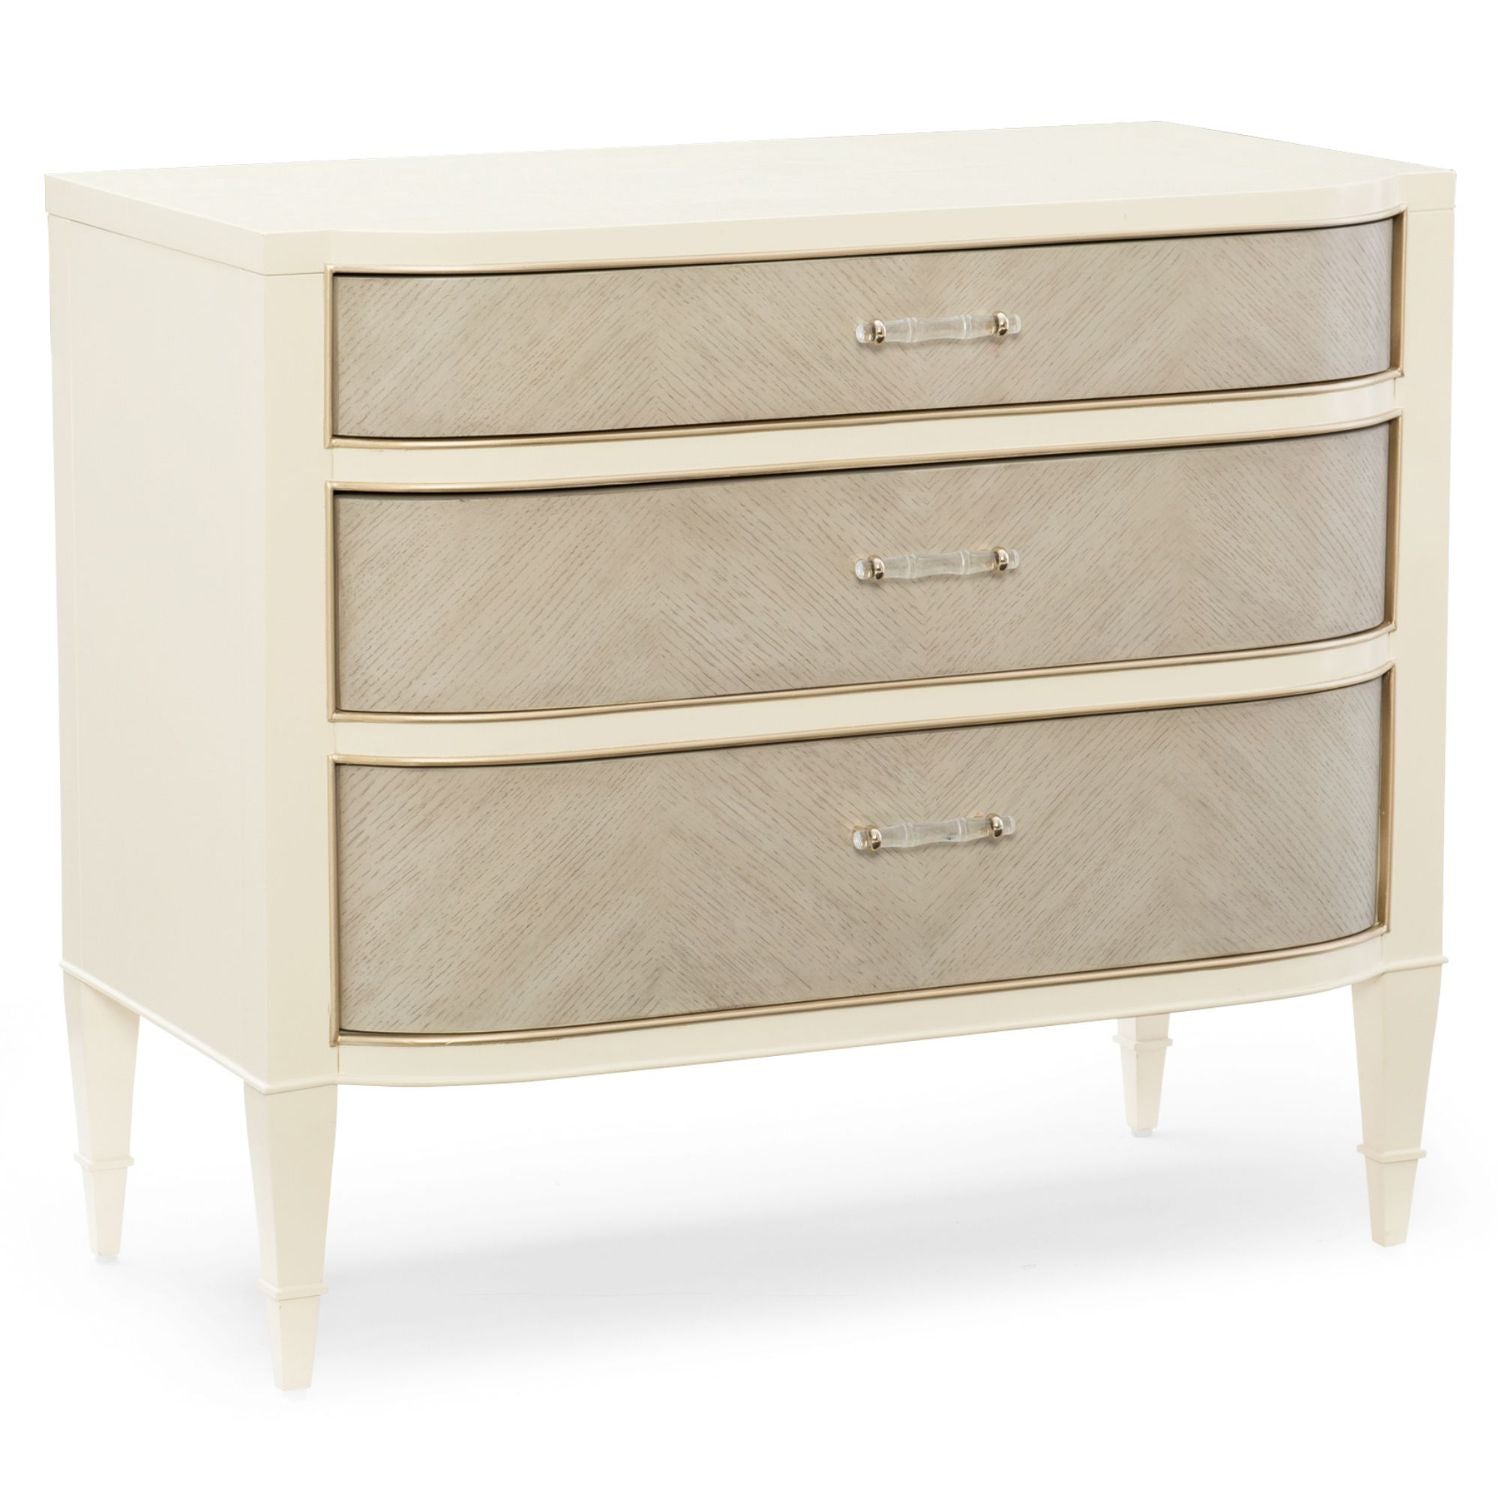  Caracole-Caracole Classic Dress Code Bedside Table-Natural 549 